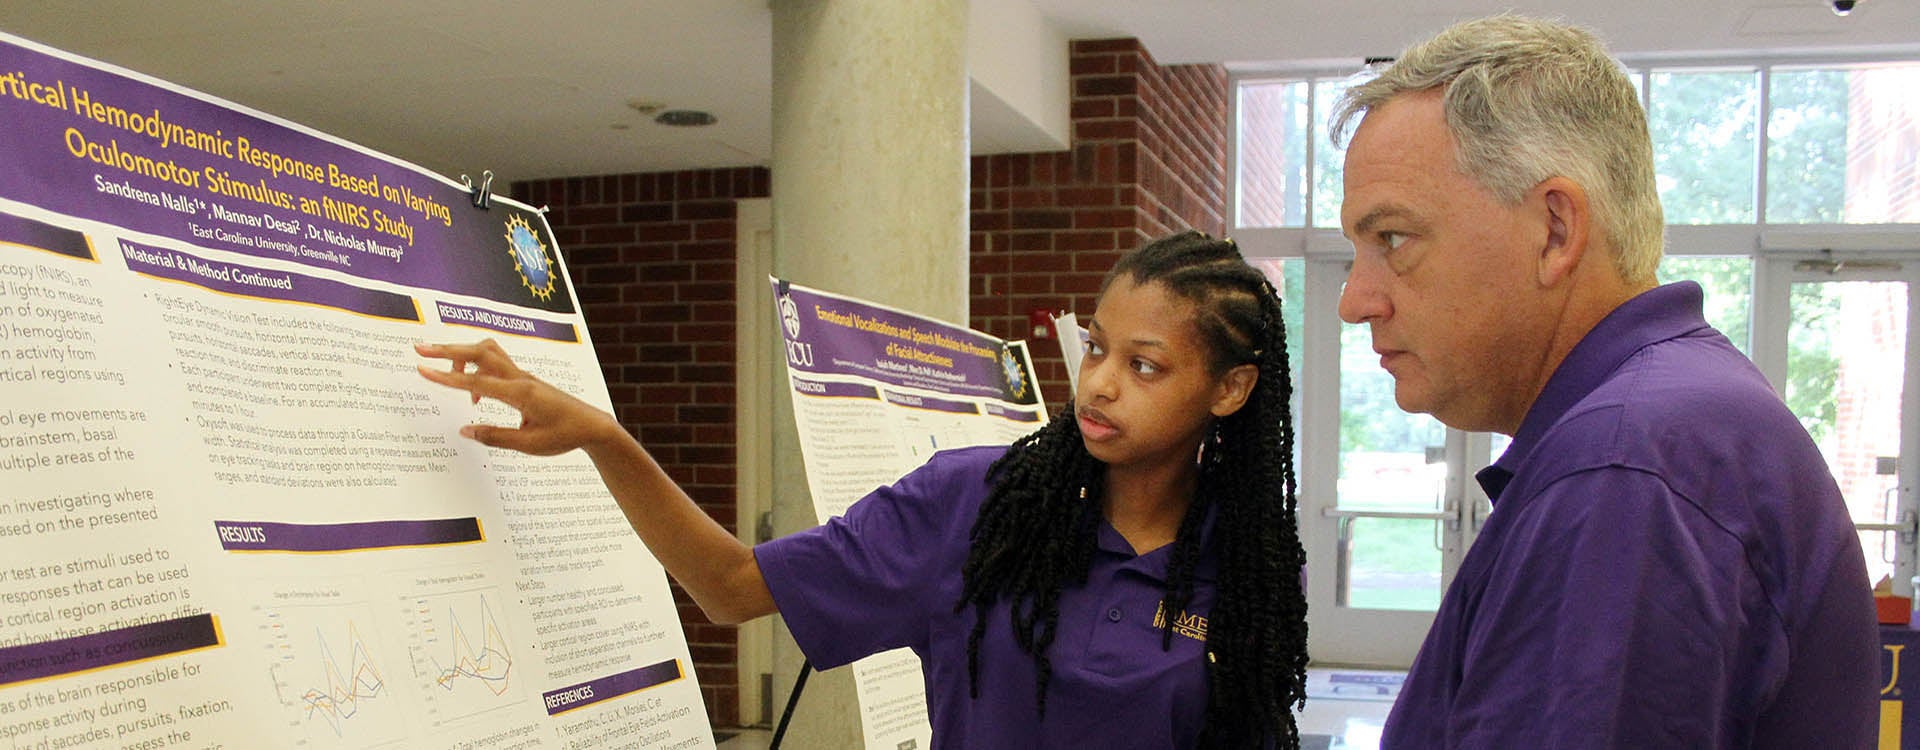 East Carolina University junior biomedical engineering student Sandrena Nalls discusses a research project she worked on during the Biomedical Engineering in Simulations, Imaging and Modeling Research Experience for Undergraduates program Friday in the Science and Technology Building. (Photos by Ken Buday)